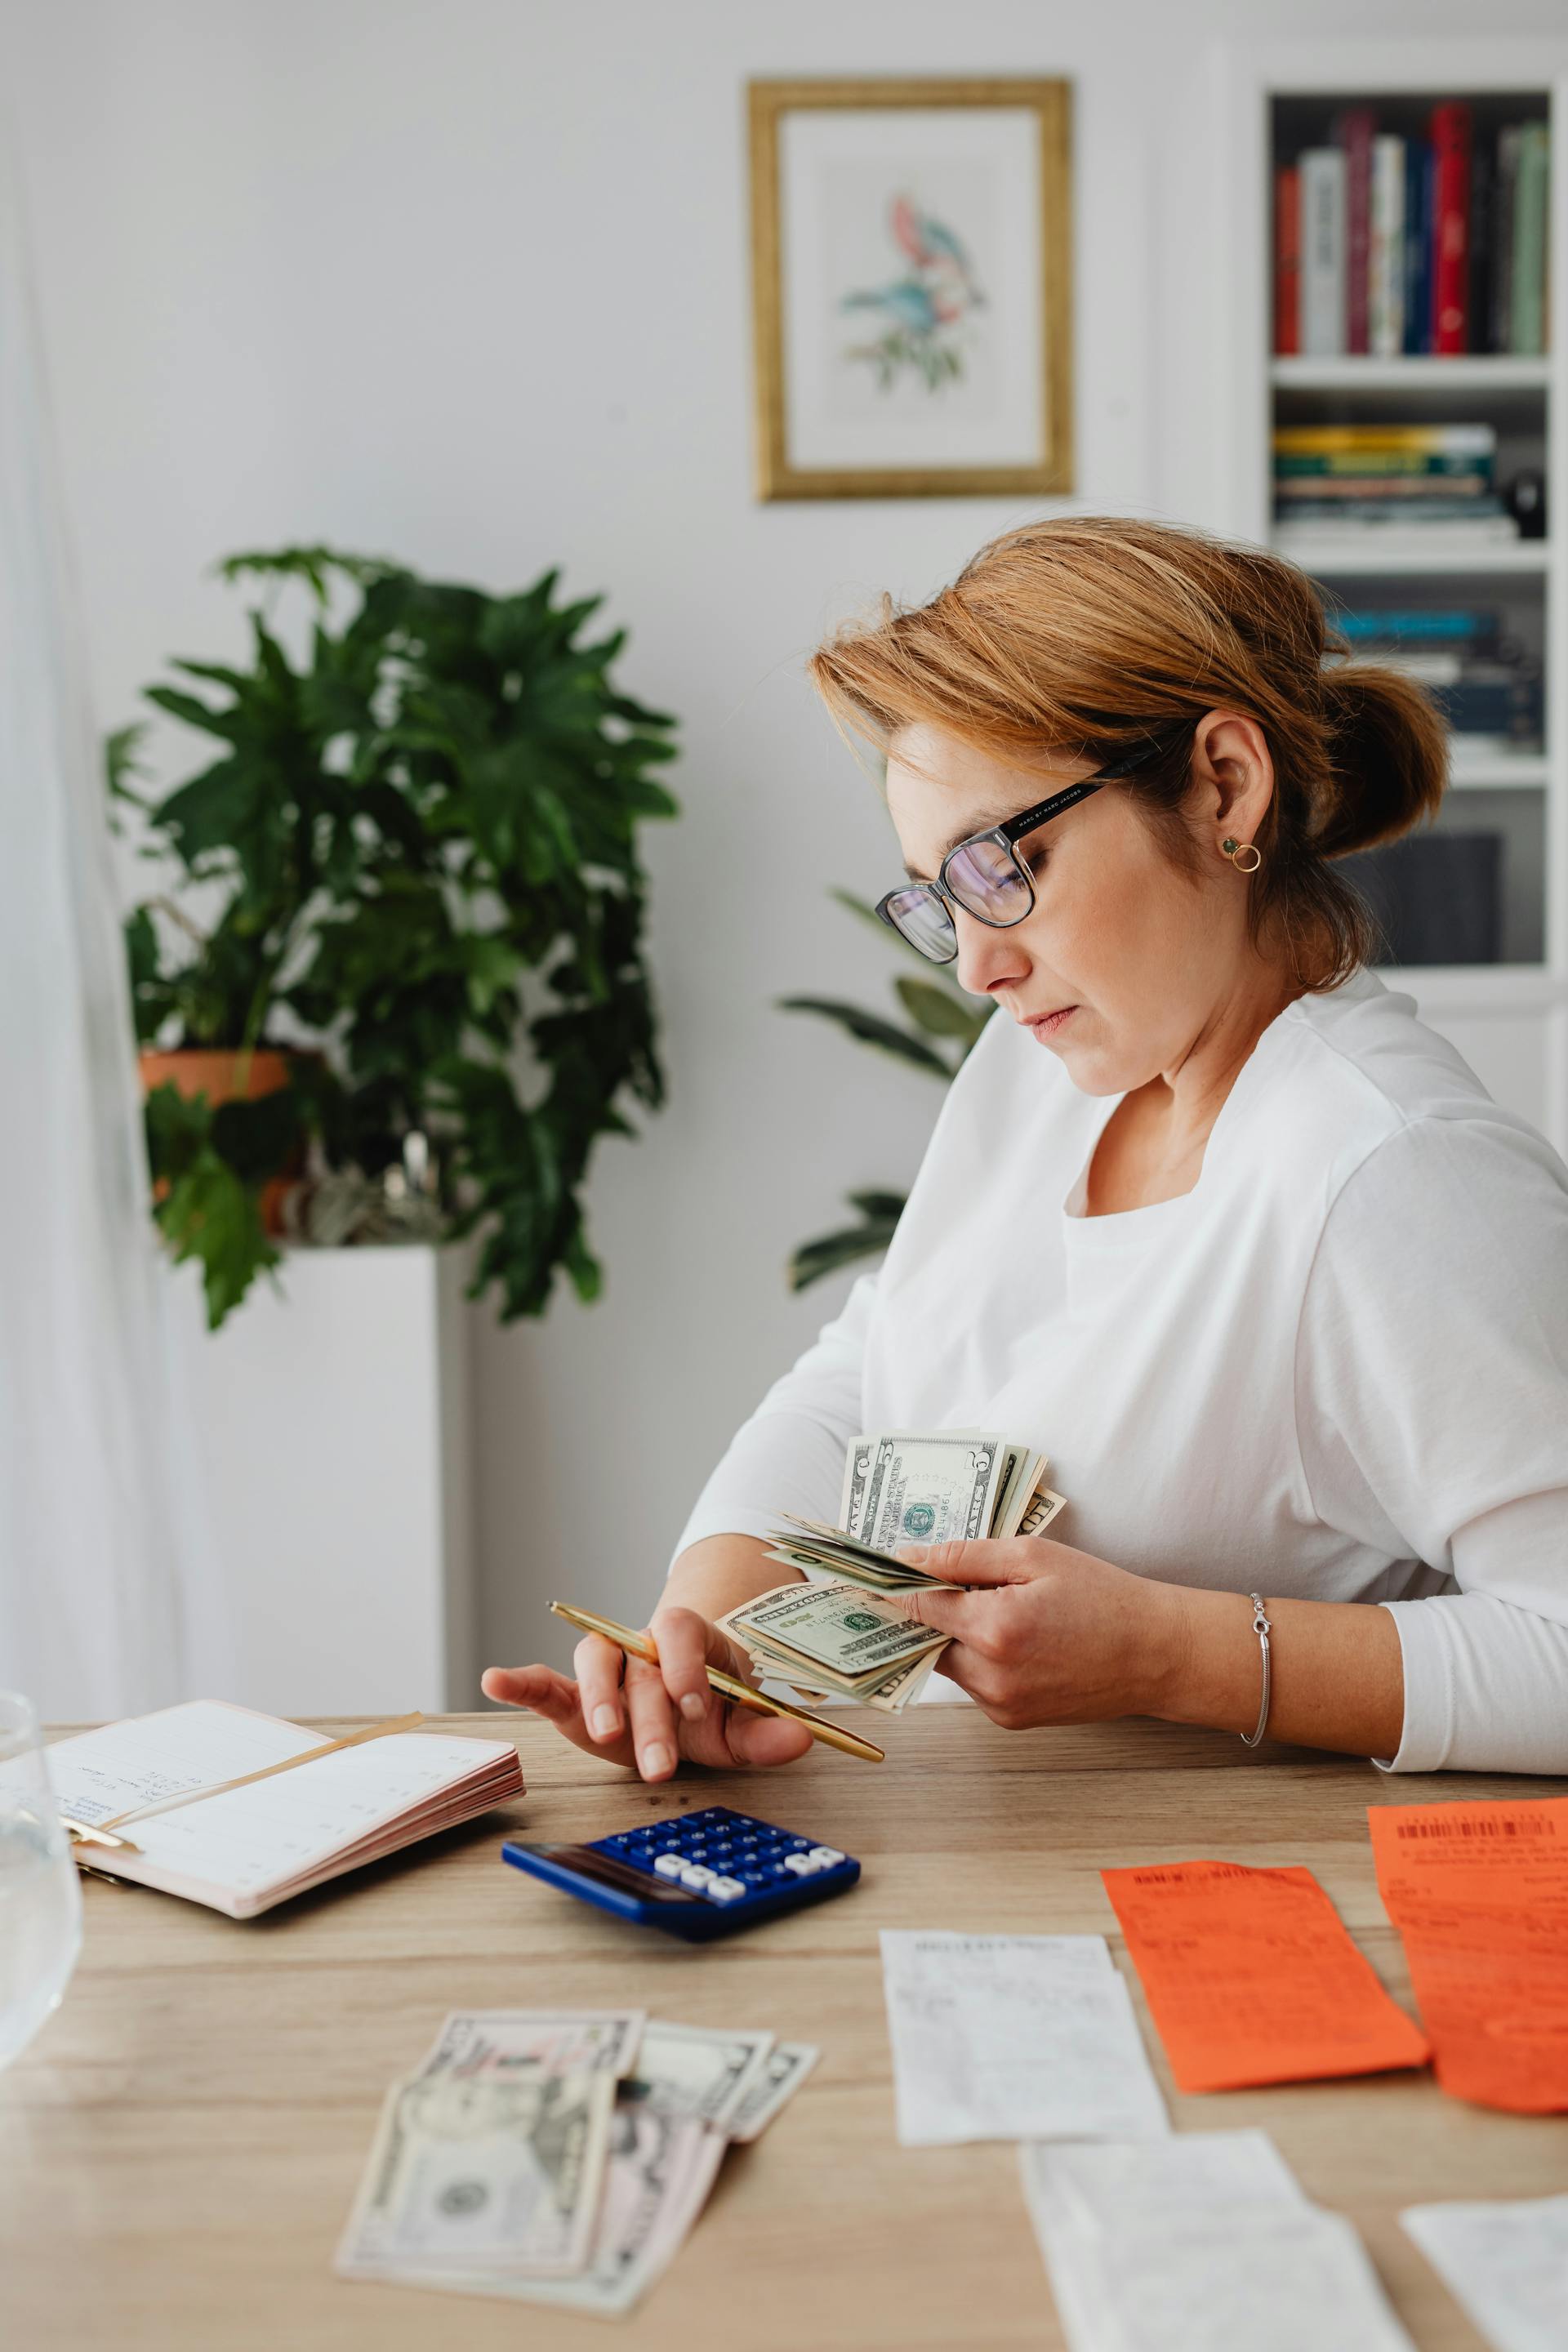 A woman counting money | Source: Pexels